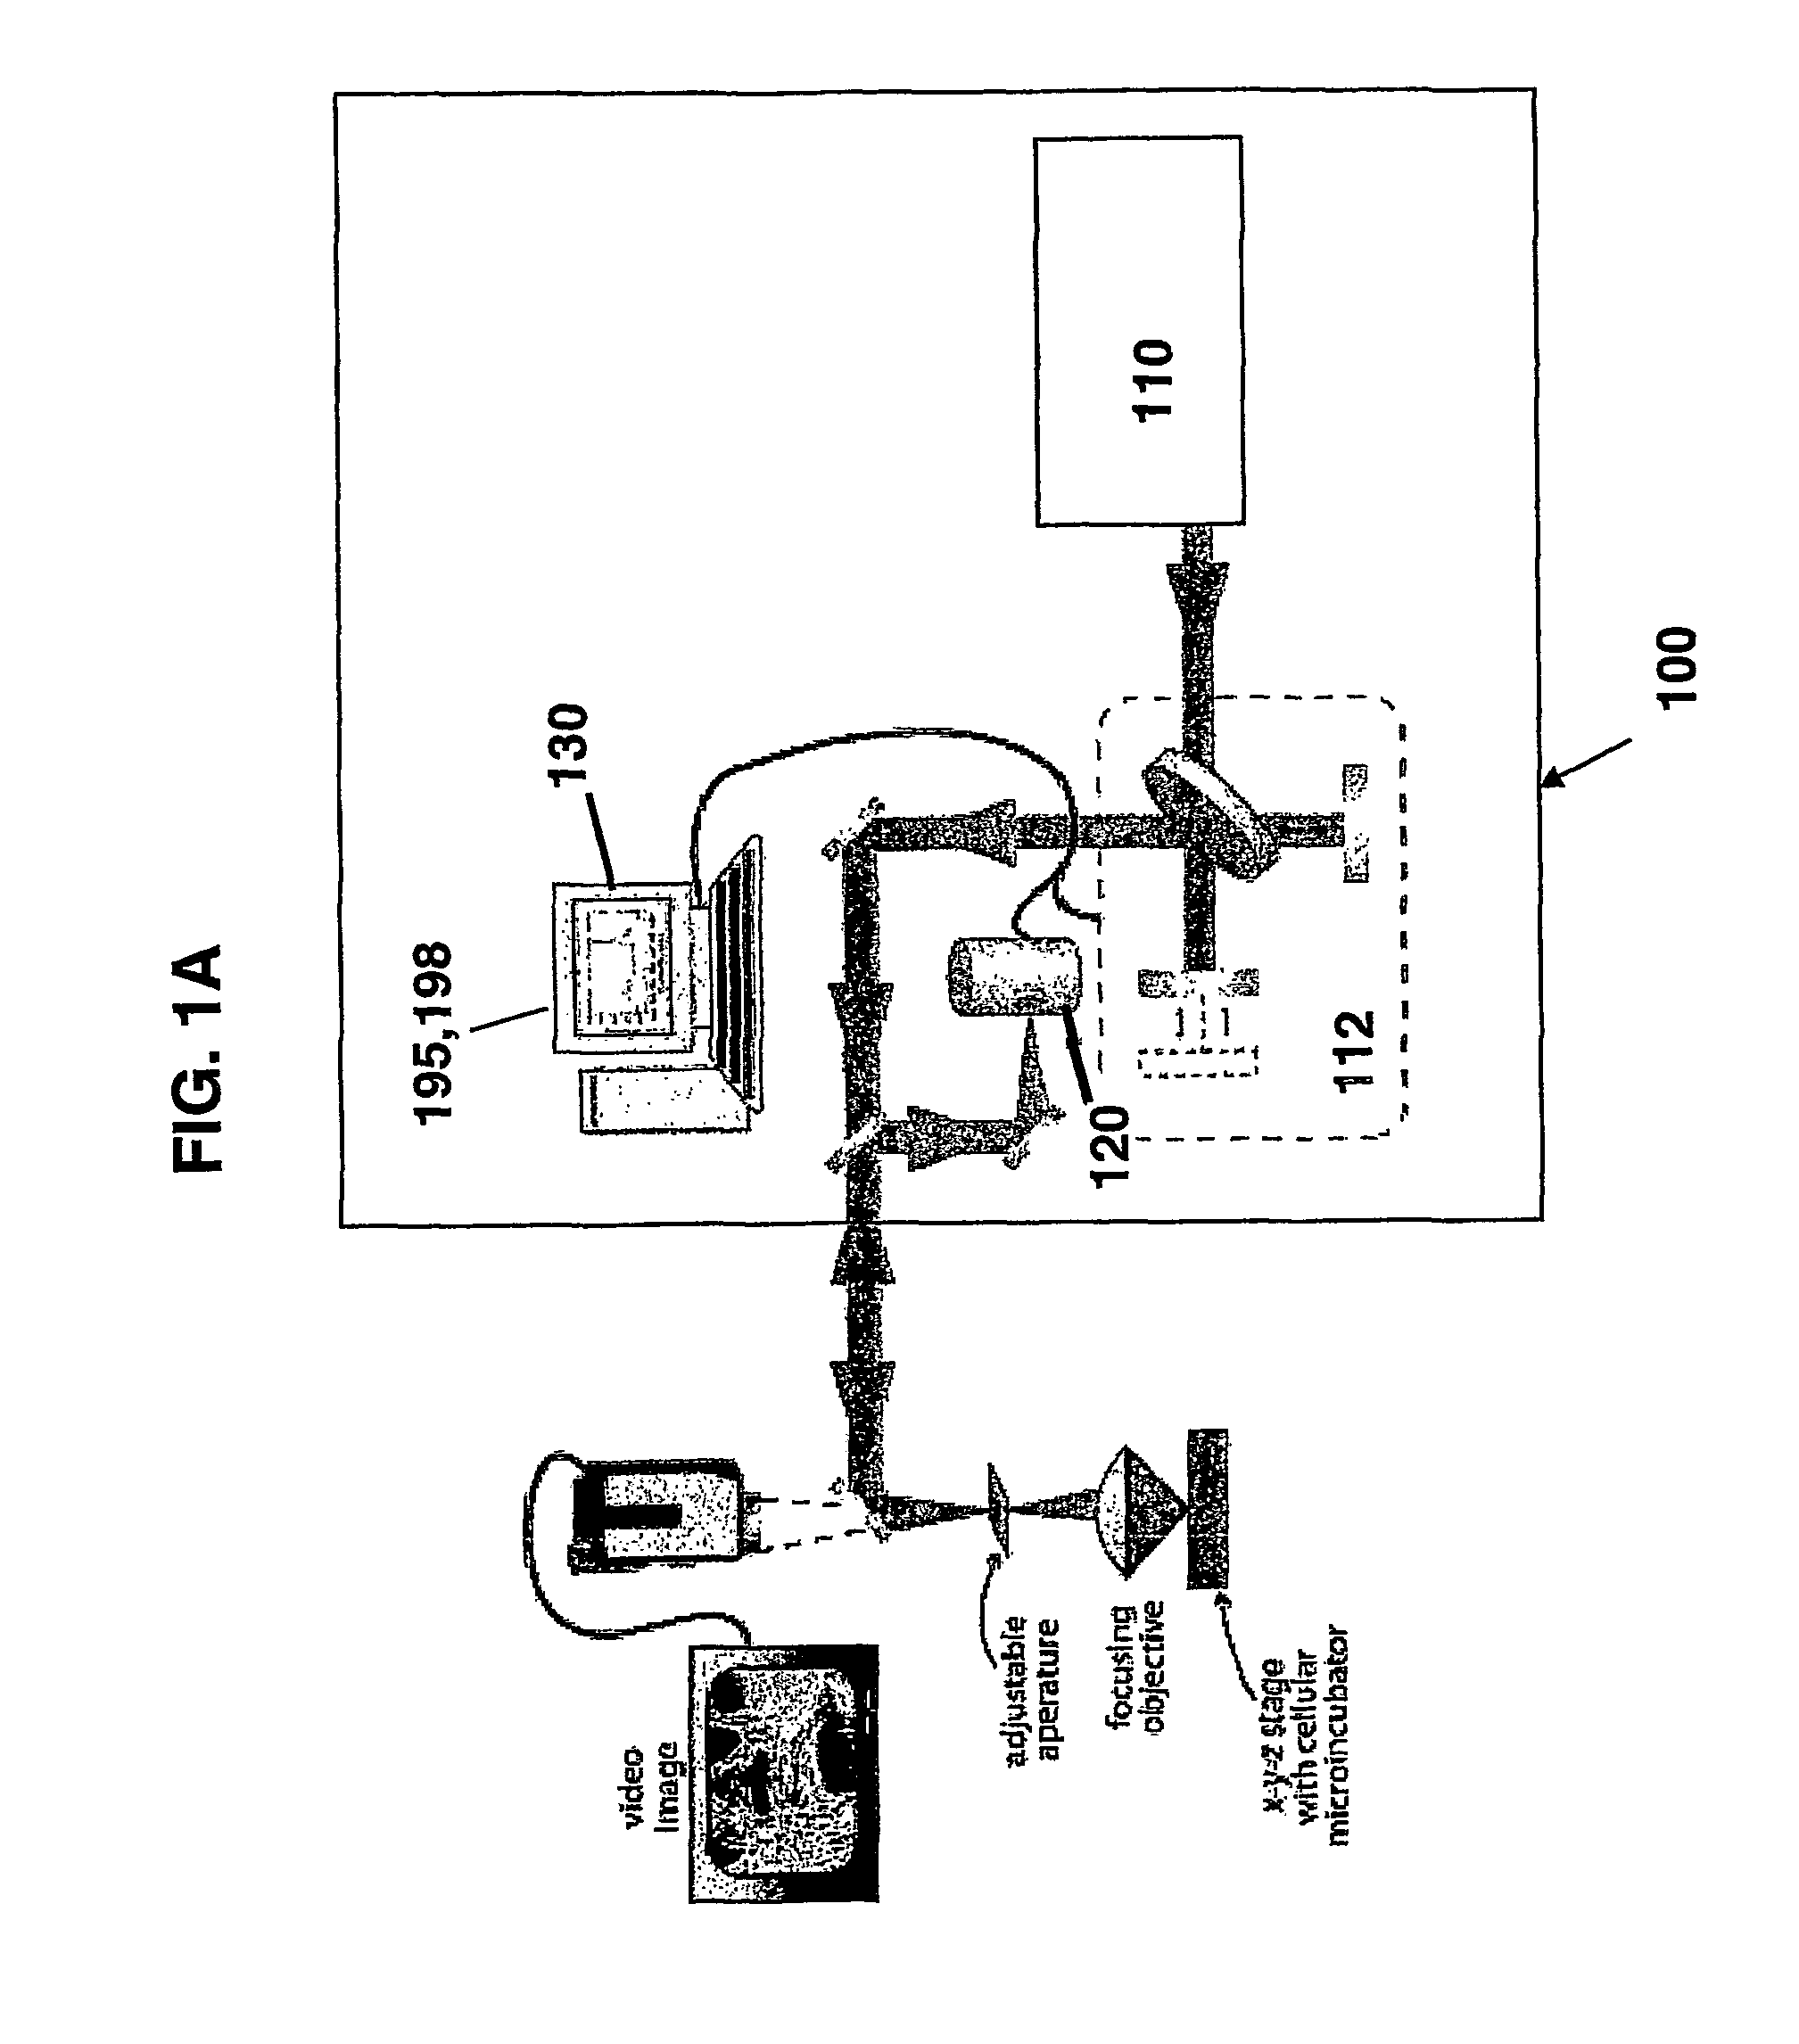 Catheter based mid-infrared reflectance and reflectance generated absorption spectroscopy